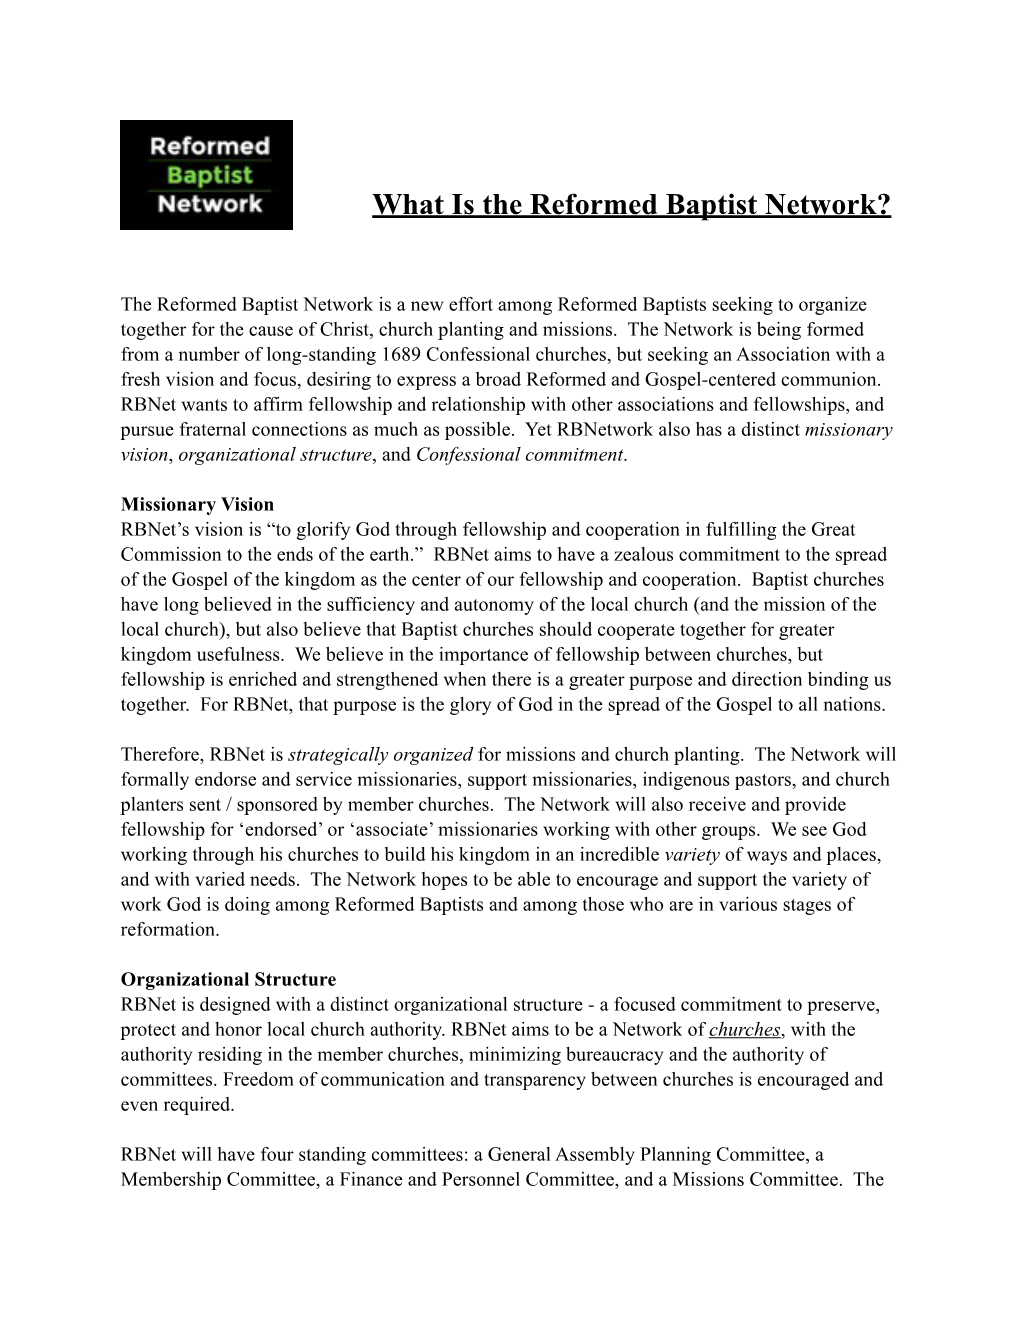 What Is the Rbnetwork.Pages